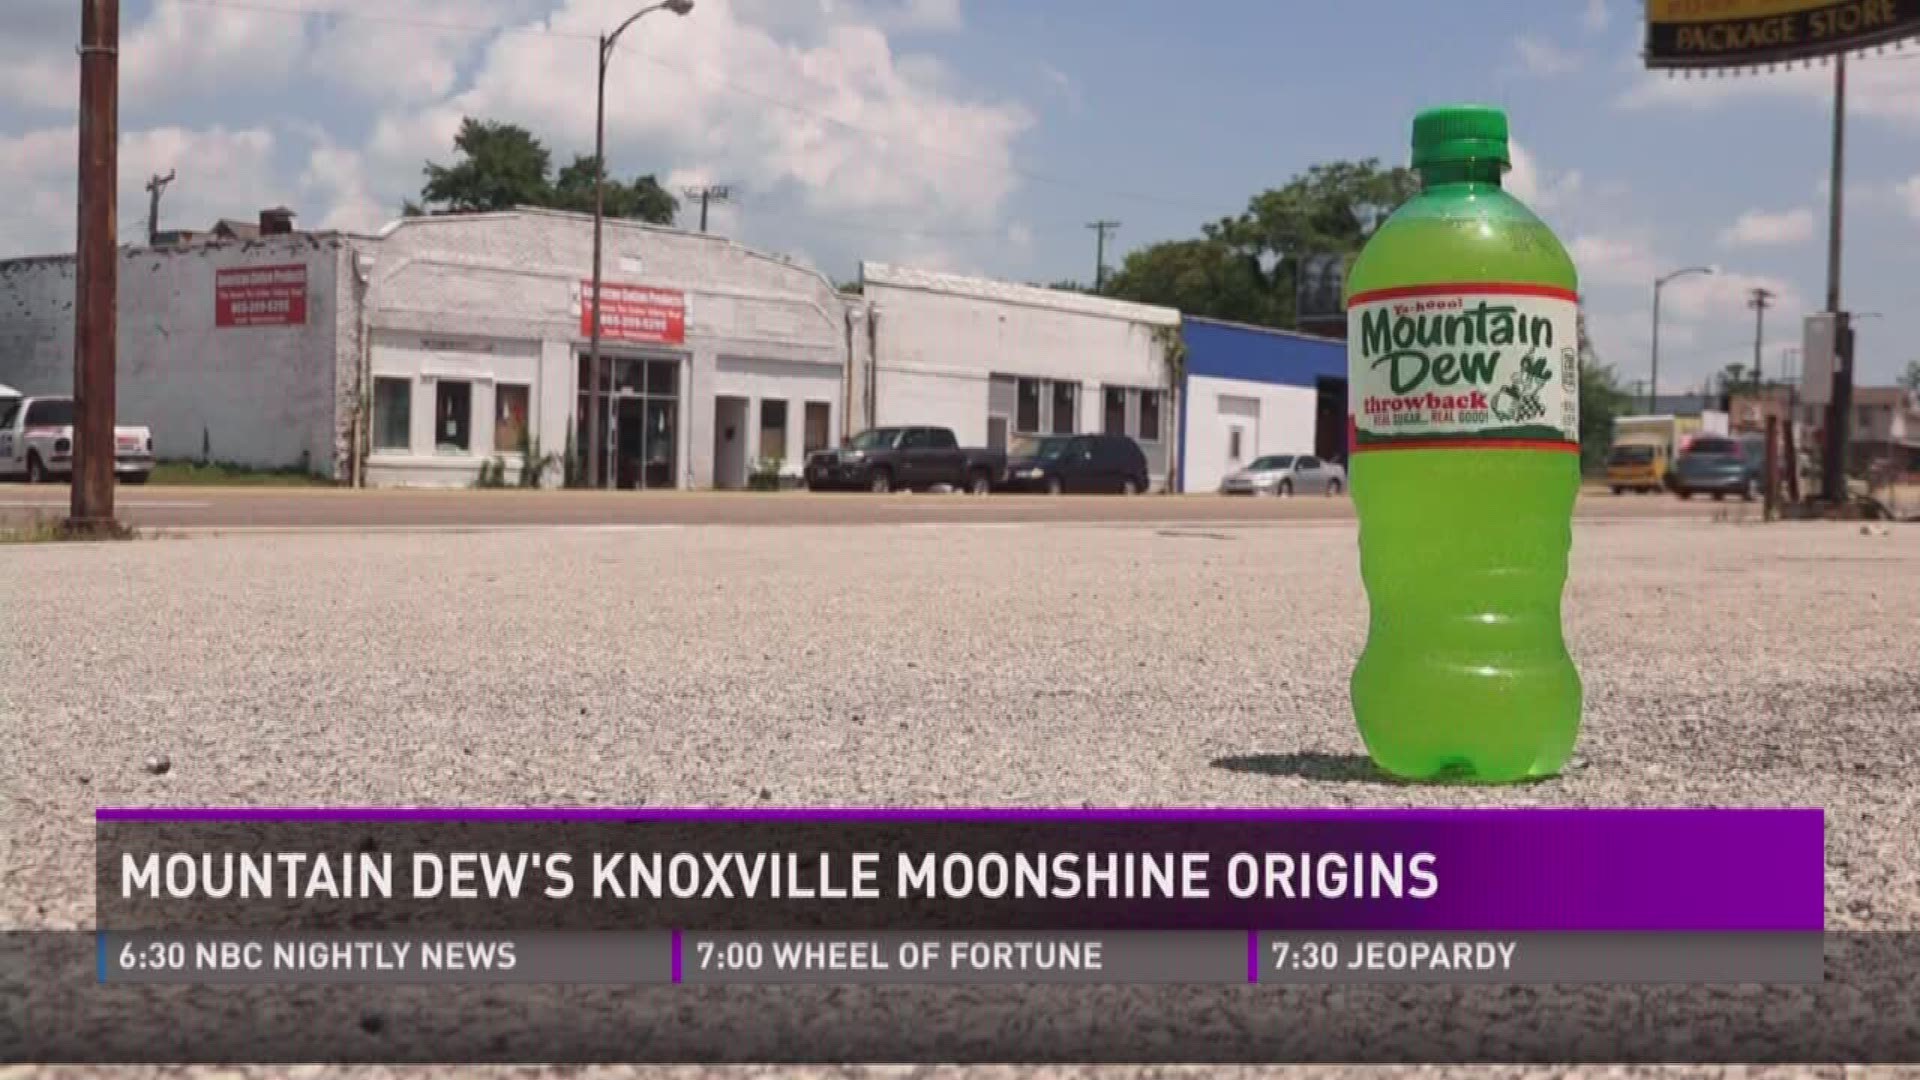 July 21, 2017: "Mountain dew" has multiple meanings in Knoxville. There's good ol' moonshine, a short-lived 1928 soda, and a 1940s beverage brand that evolved into one of the world's best-selling soft drinks.